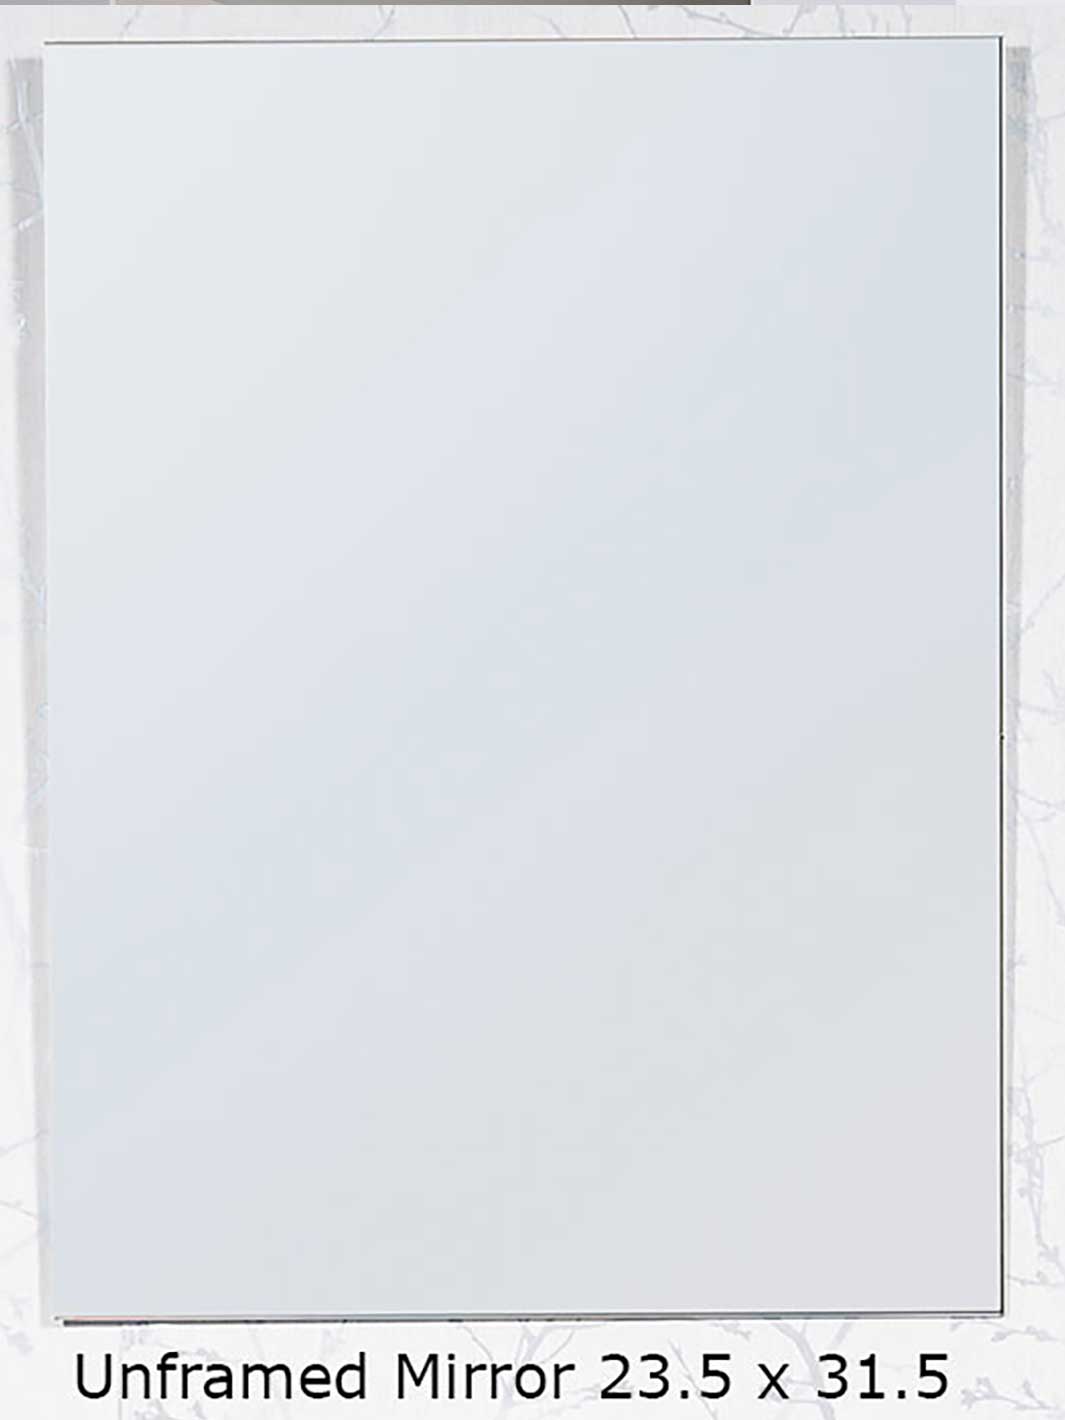 unframed mirror included with the vanity 23 x 5 wide by 31.5 high